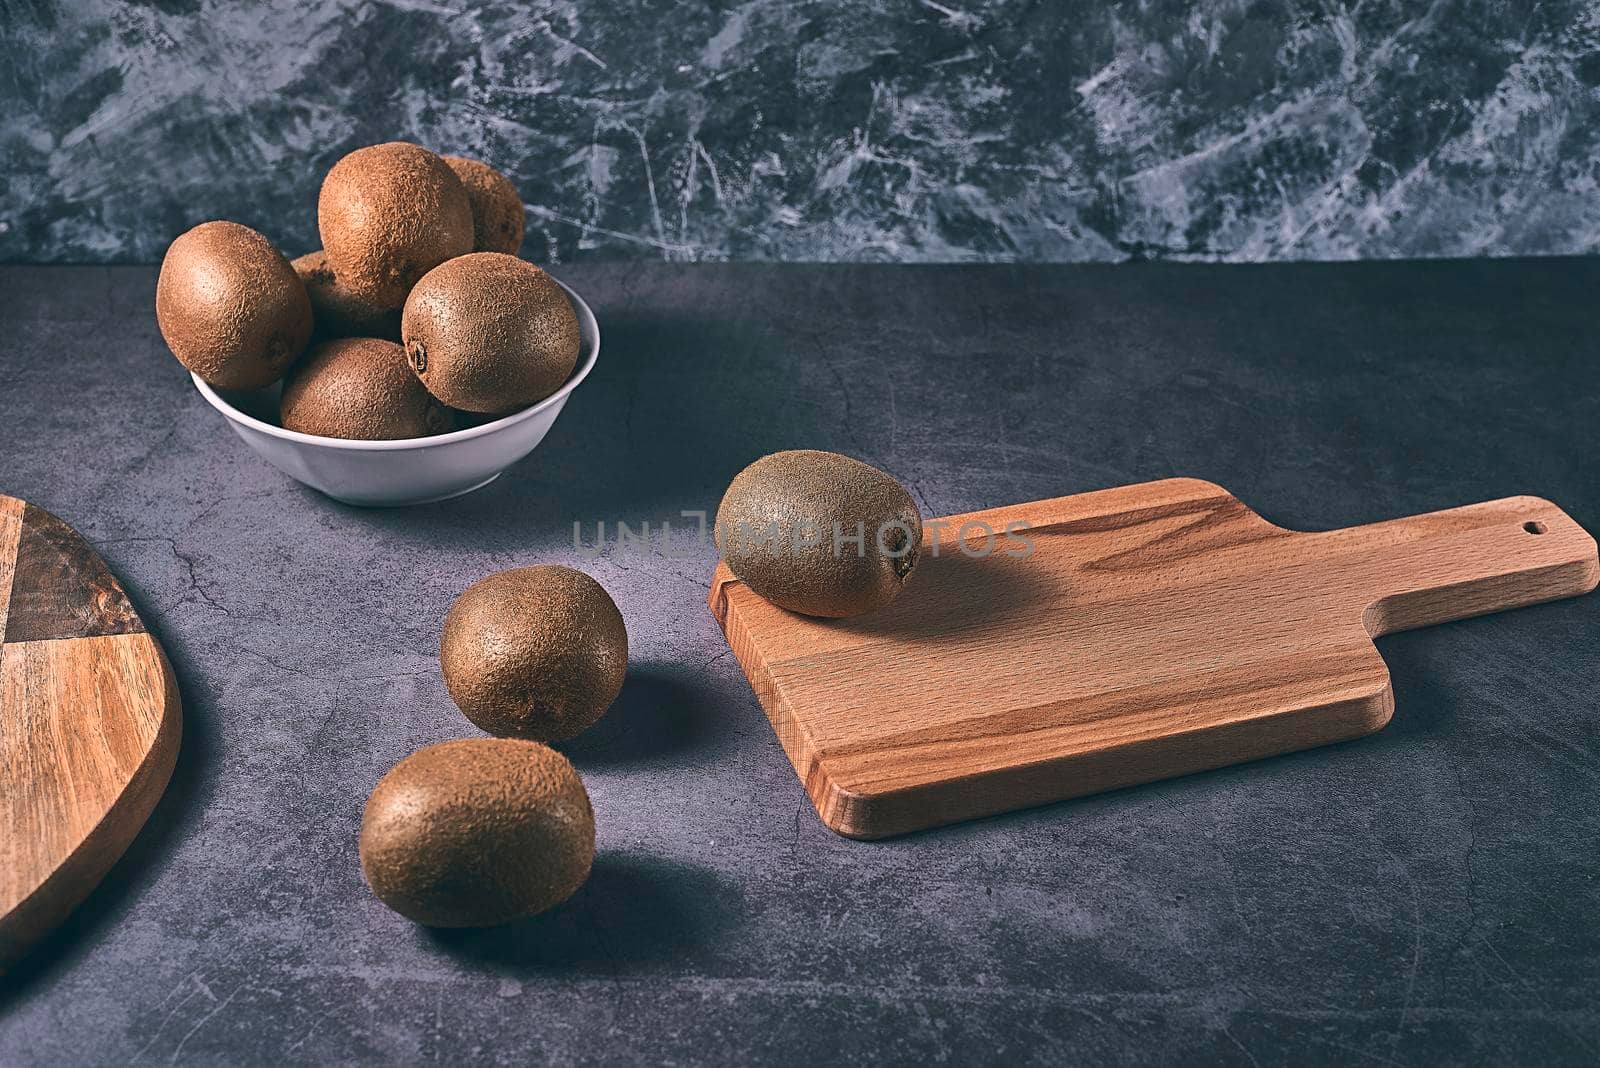 Three kiwis on a wooden board and one in a bowl. Dark stone floor and marble wall, white bowl.